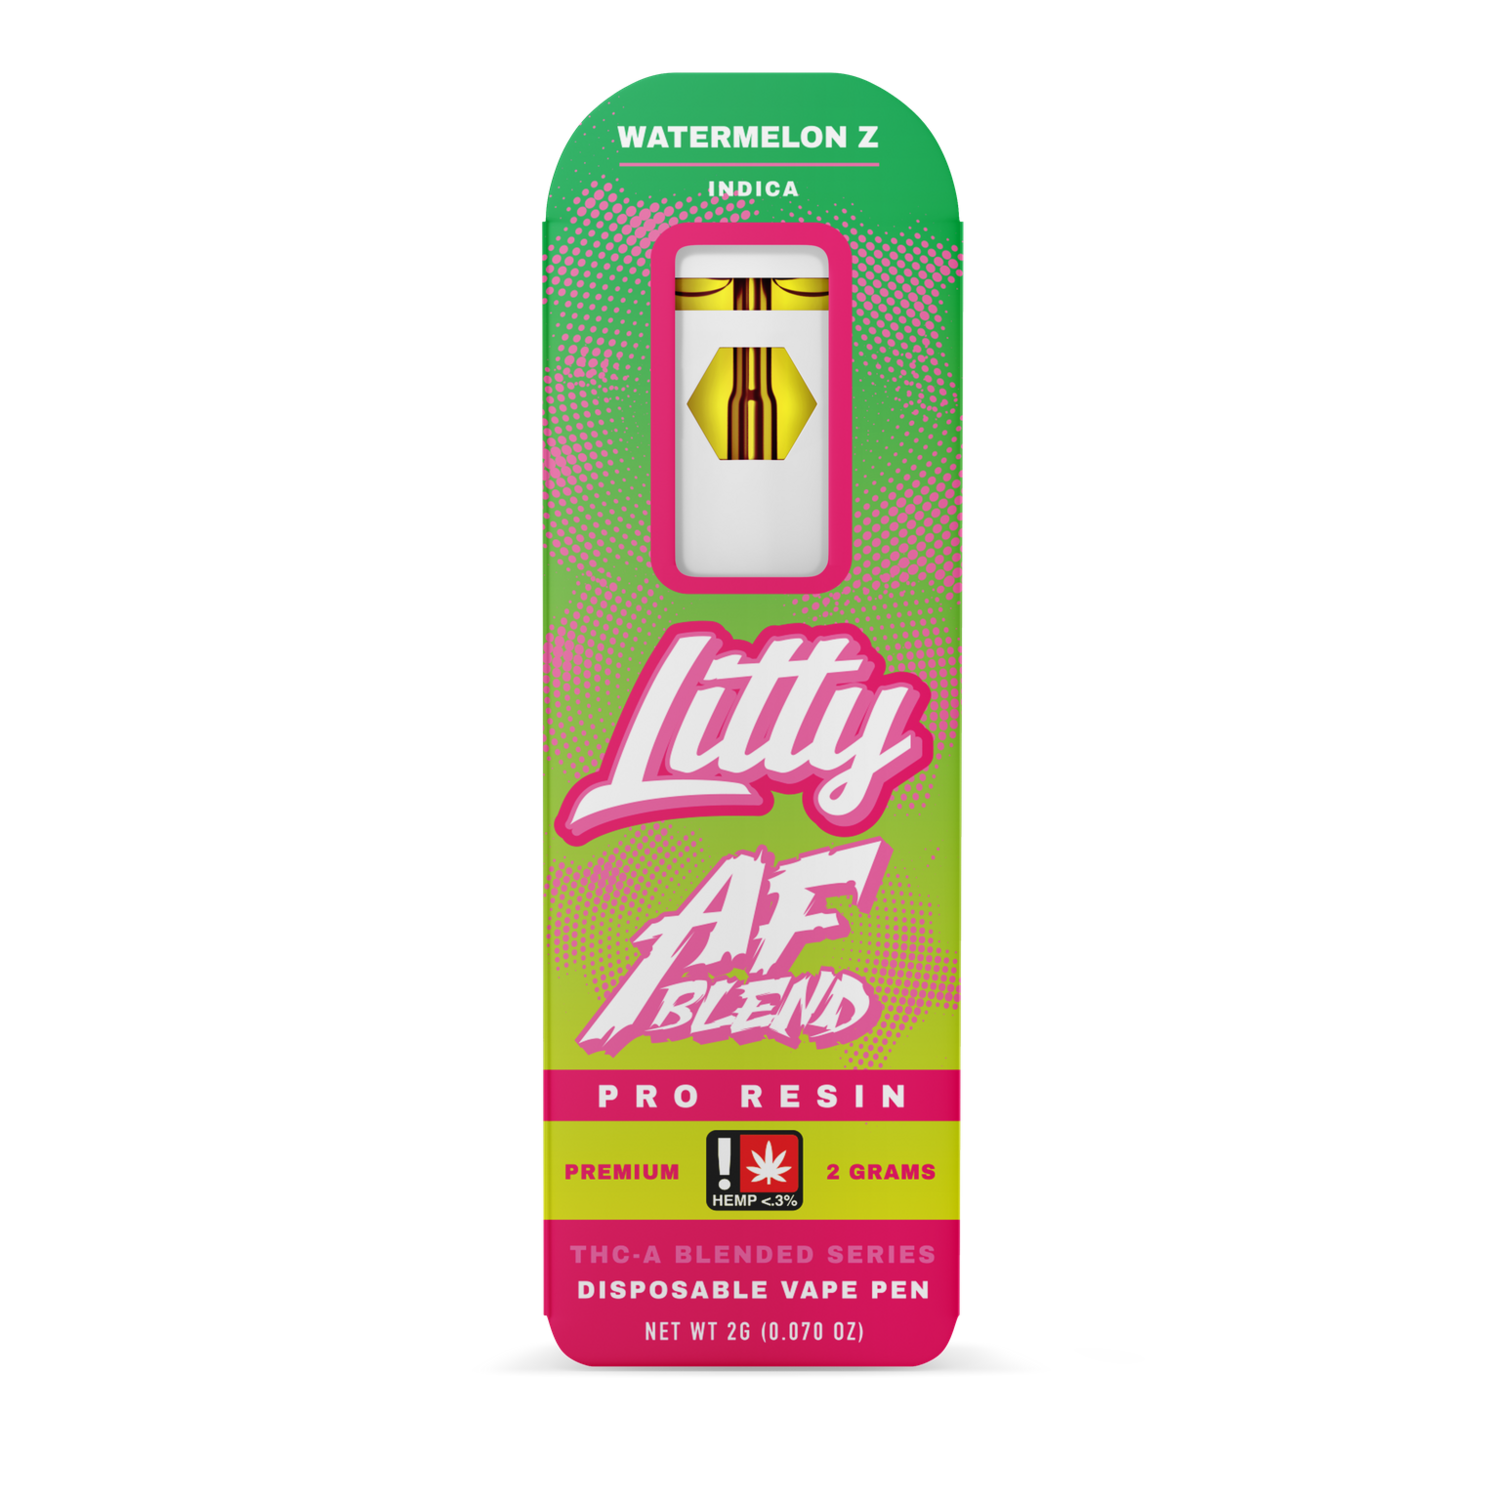 Litty - THCA - AF PRO RESIN - Watermelon Z - Indica - 2G - Disposable